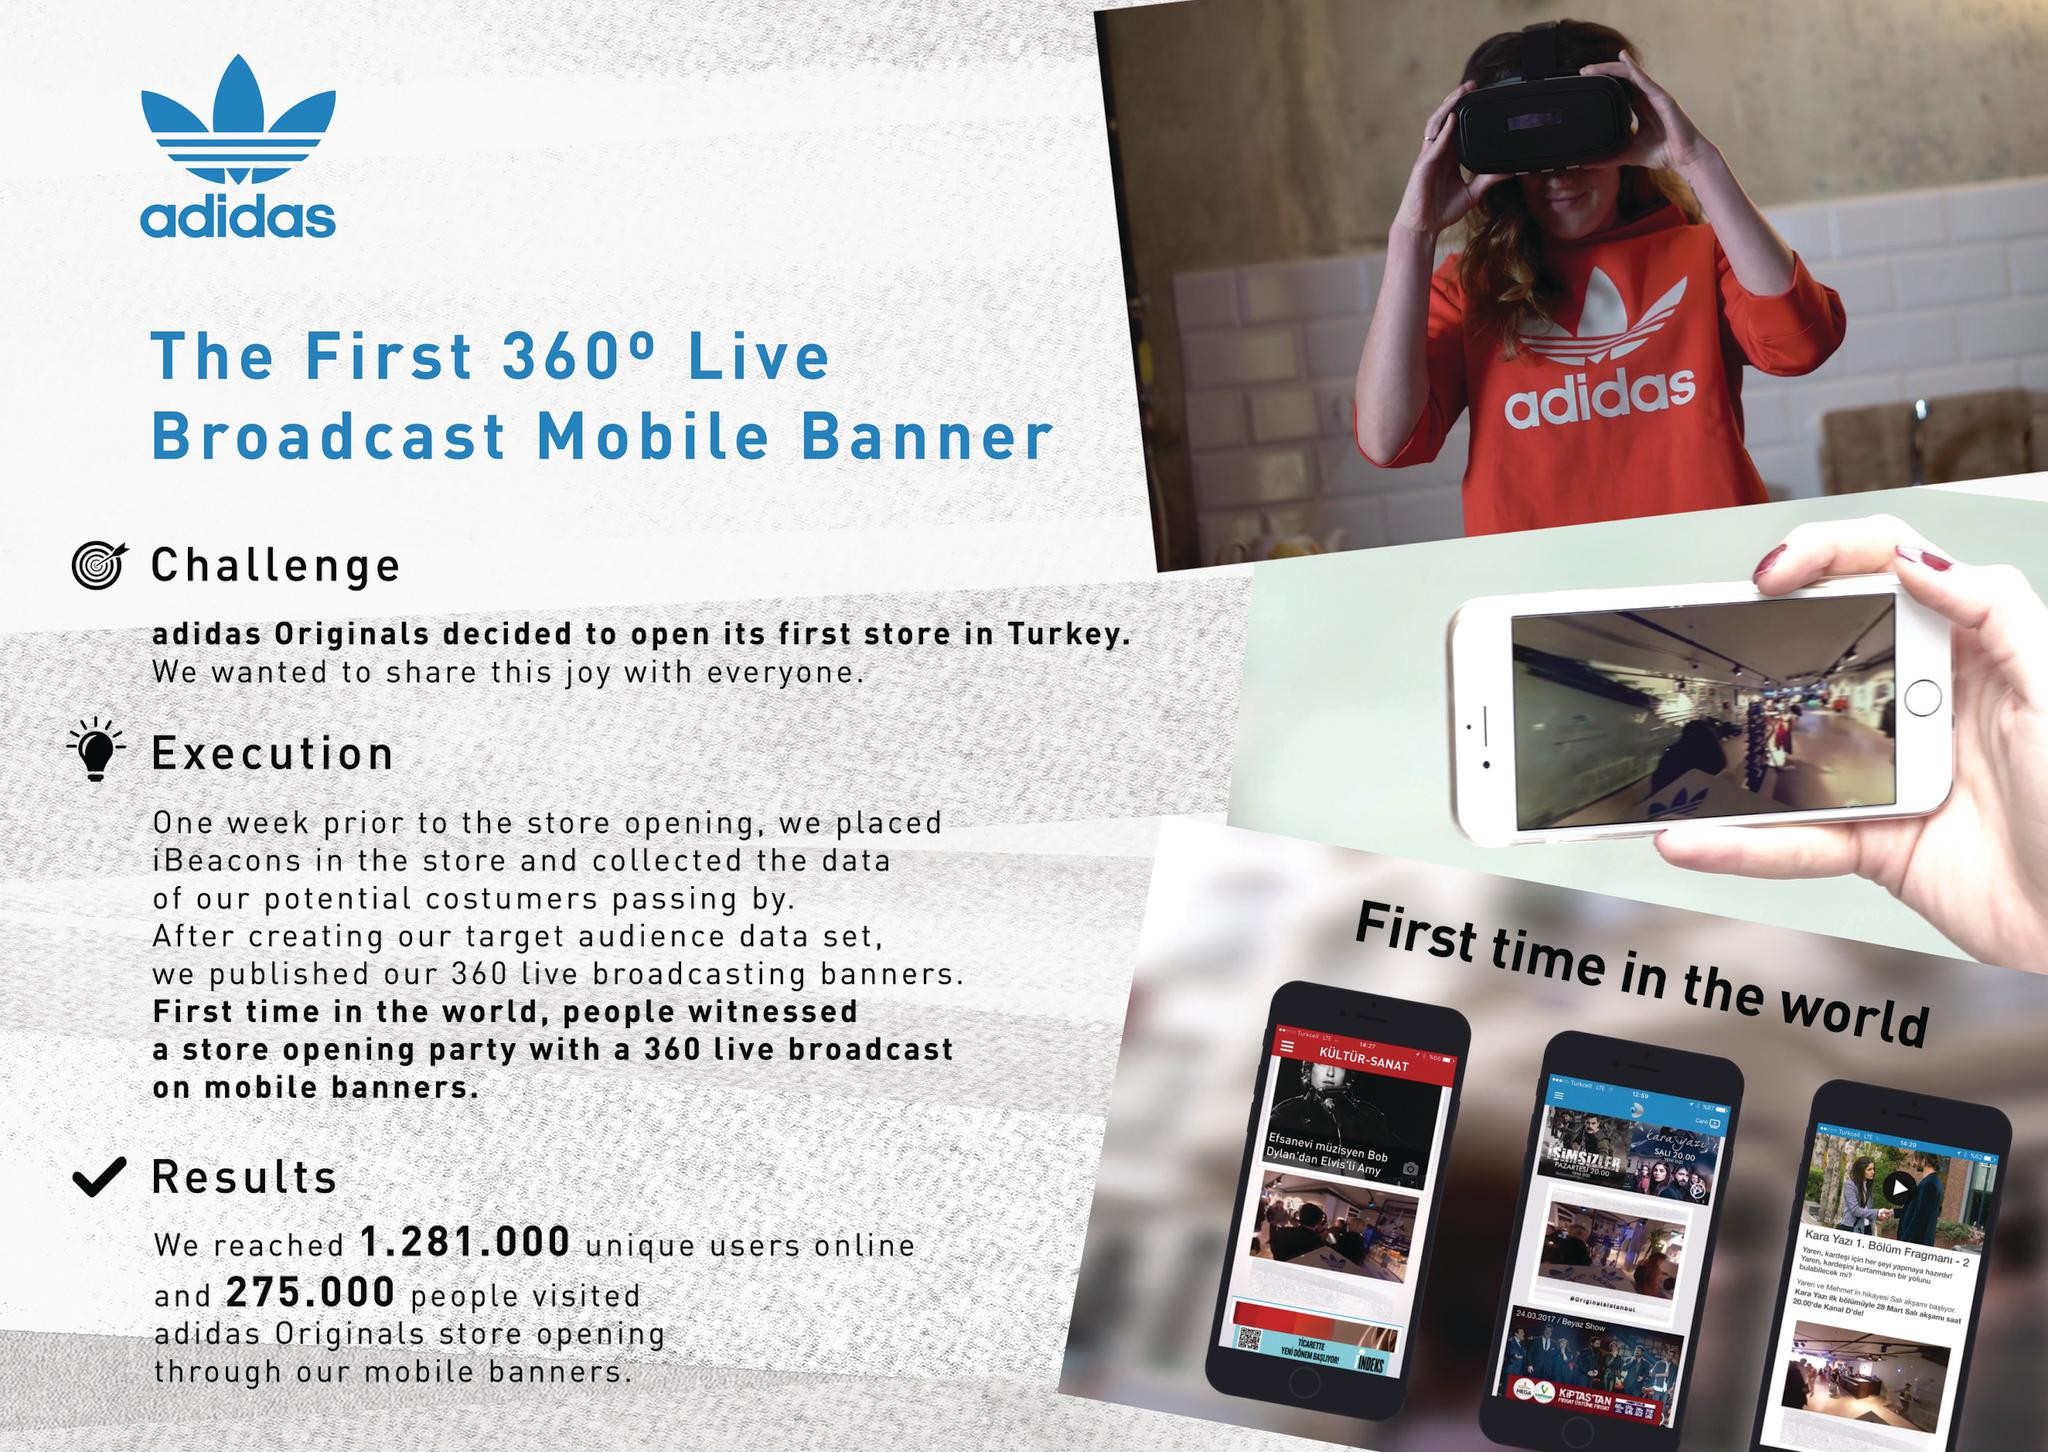 The First 360-Degree Live Broadcast Integrated Mobile Banner from adidas Originals